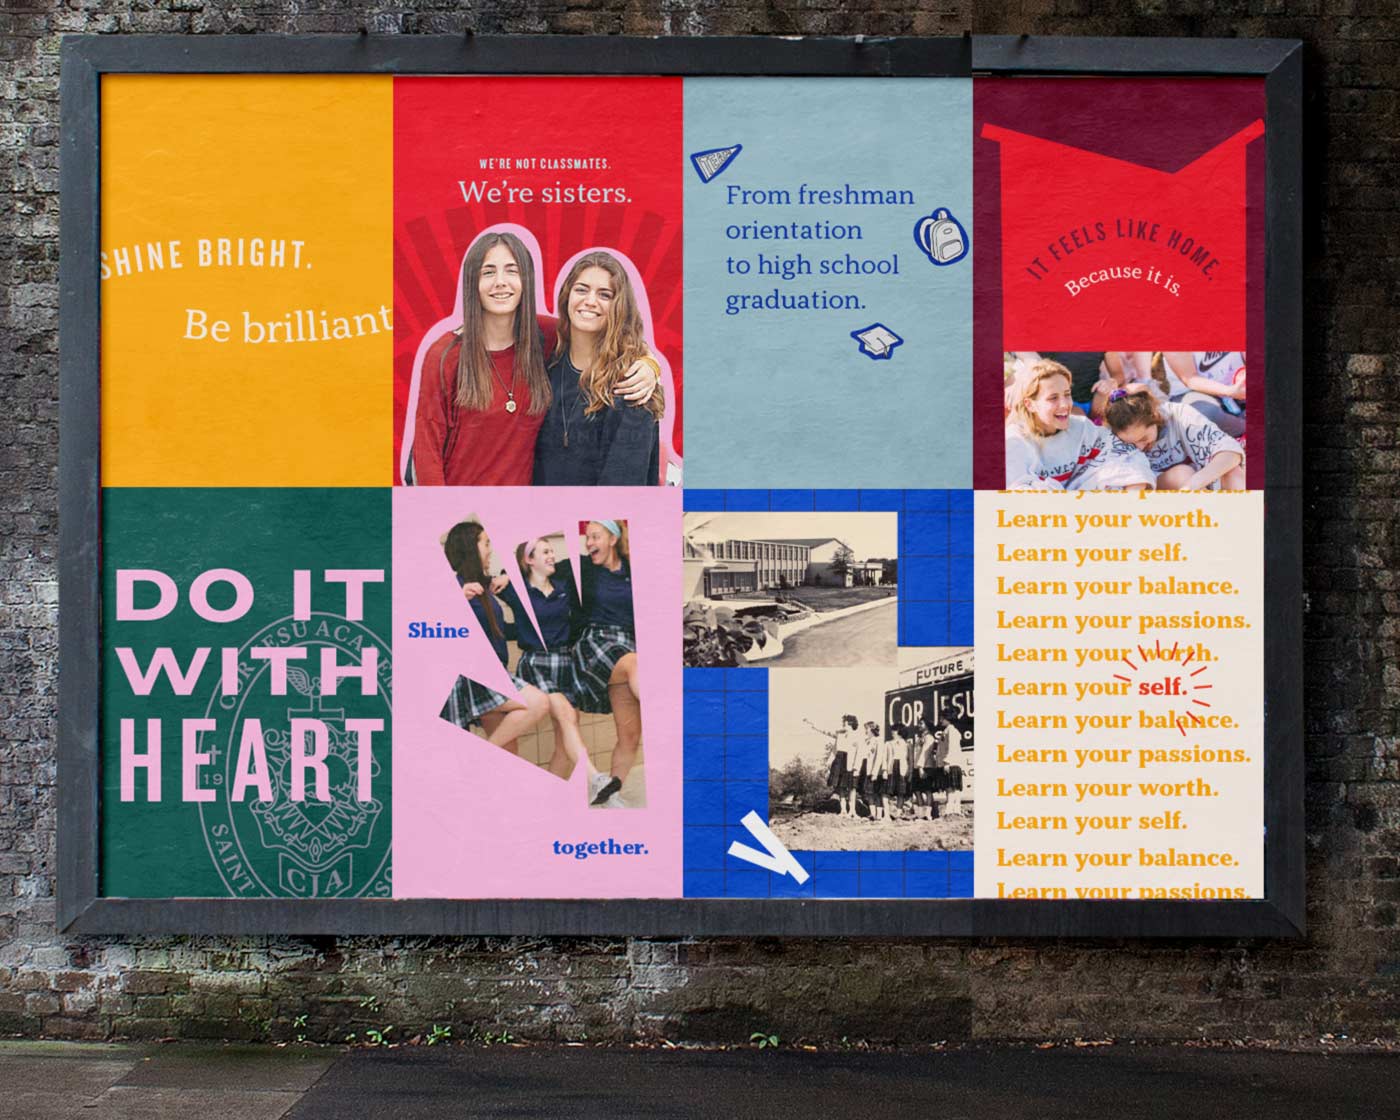 Posters promoting Cor Jesu with the school's new brand identity